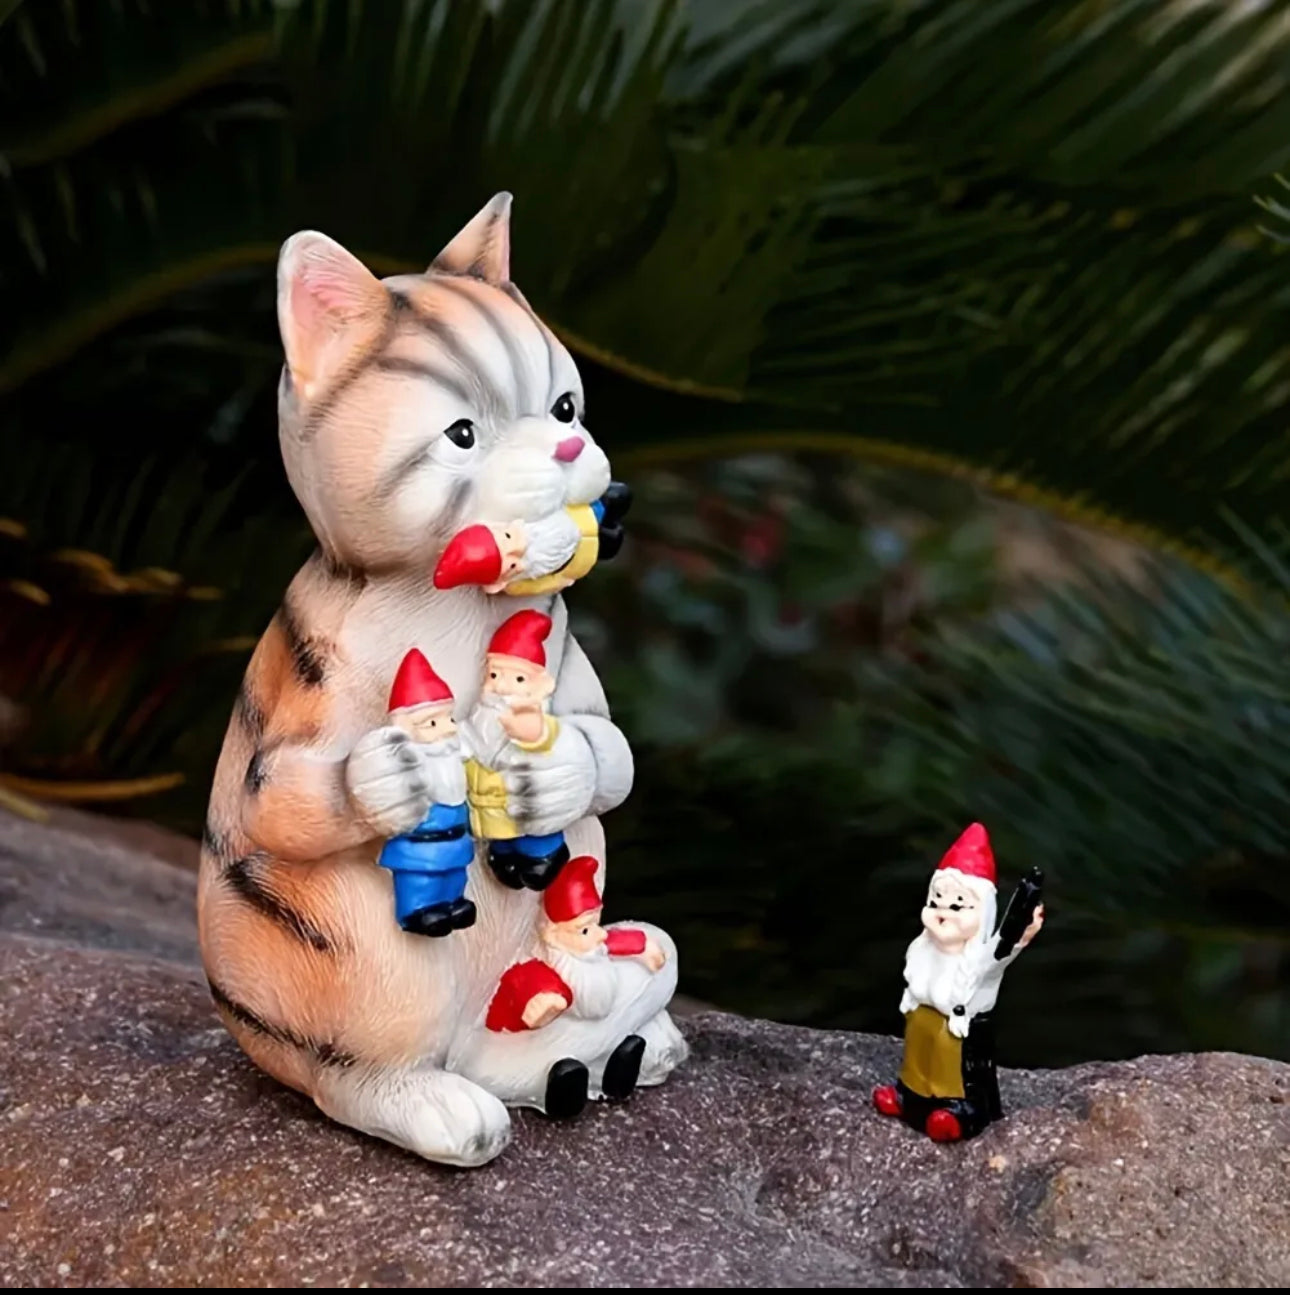 Add a Touch of Fun to Your Home with this Adorable Cat Garden Gnome Statue!